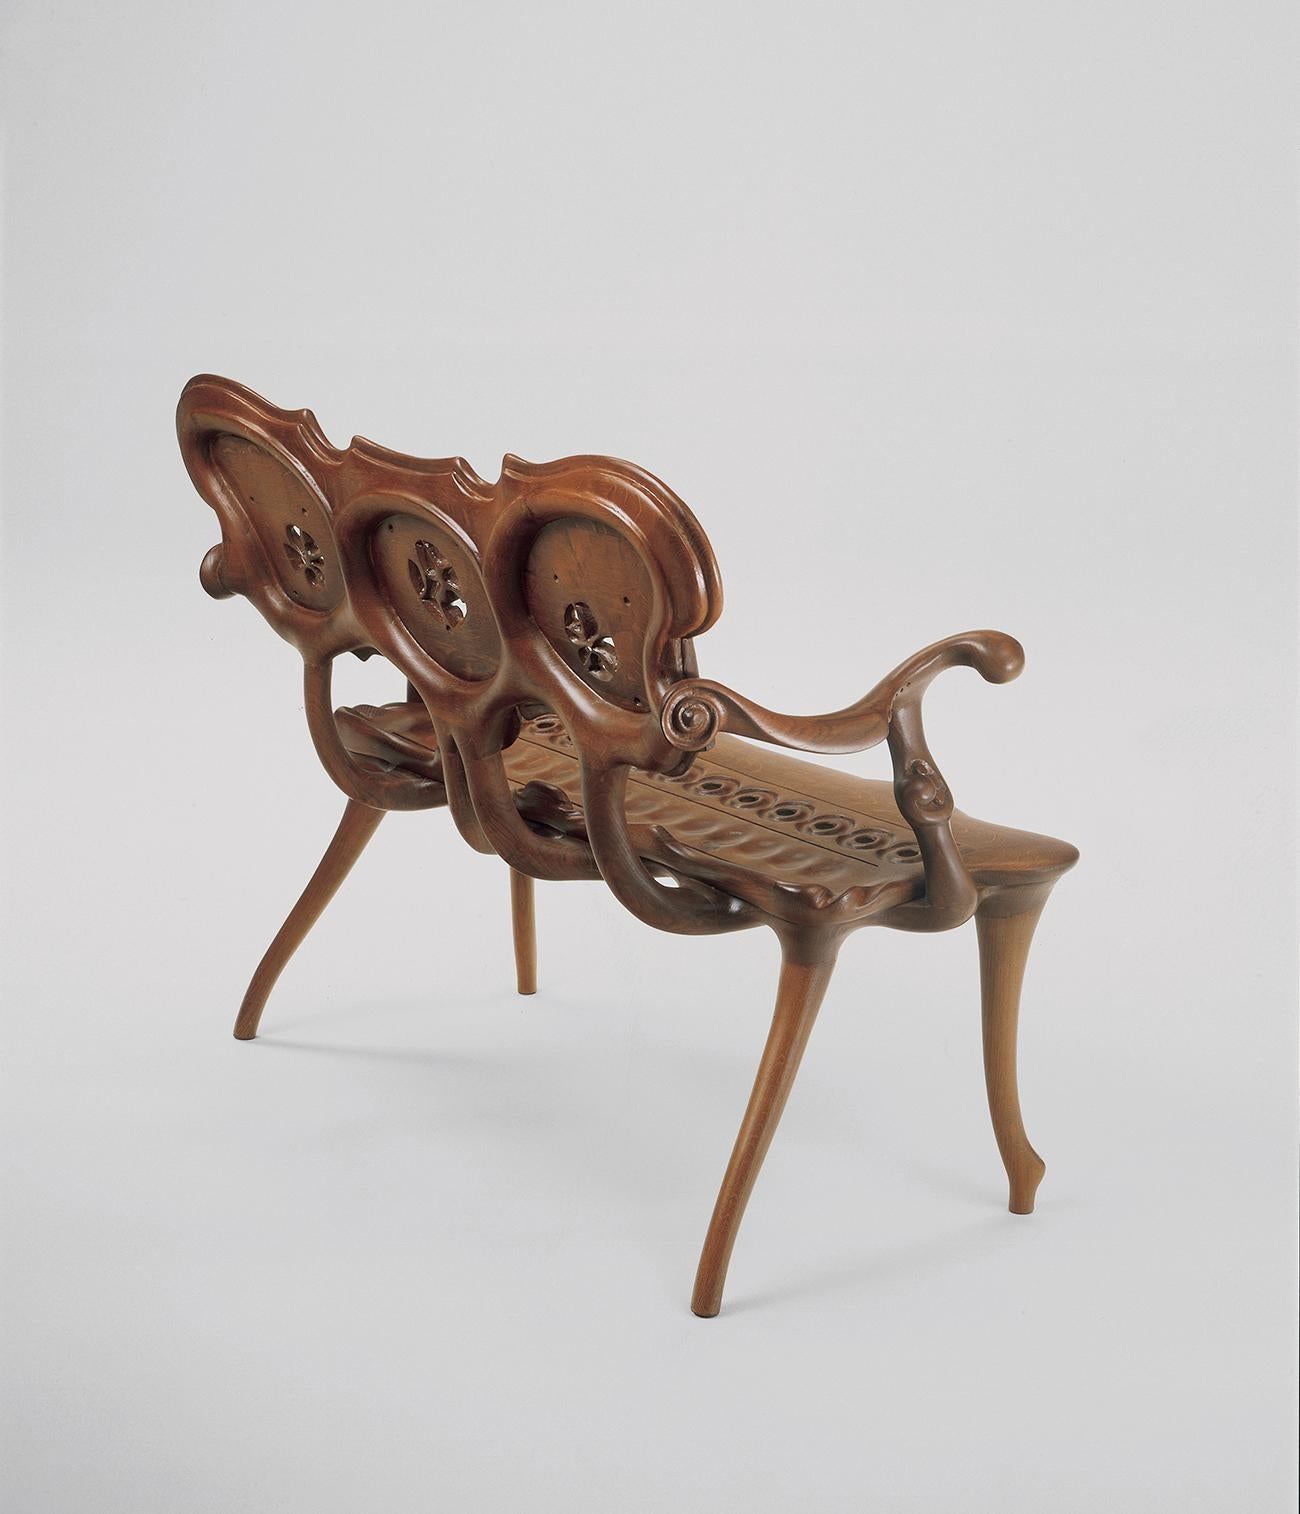 Calvet bench, Antonio Gaudí
1902
Dimensions: 118 x 54 x 95 cm
Materials: Solid oak varnished

Solid dark varnished oak 

Antoni Gaudí (1852/1926) is, without doubt, the most internationally well-known Spanish architect. But is not only his buildings